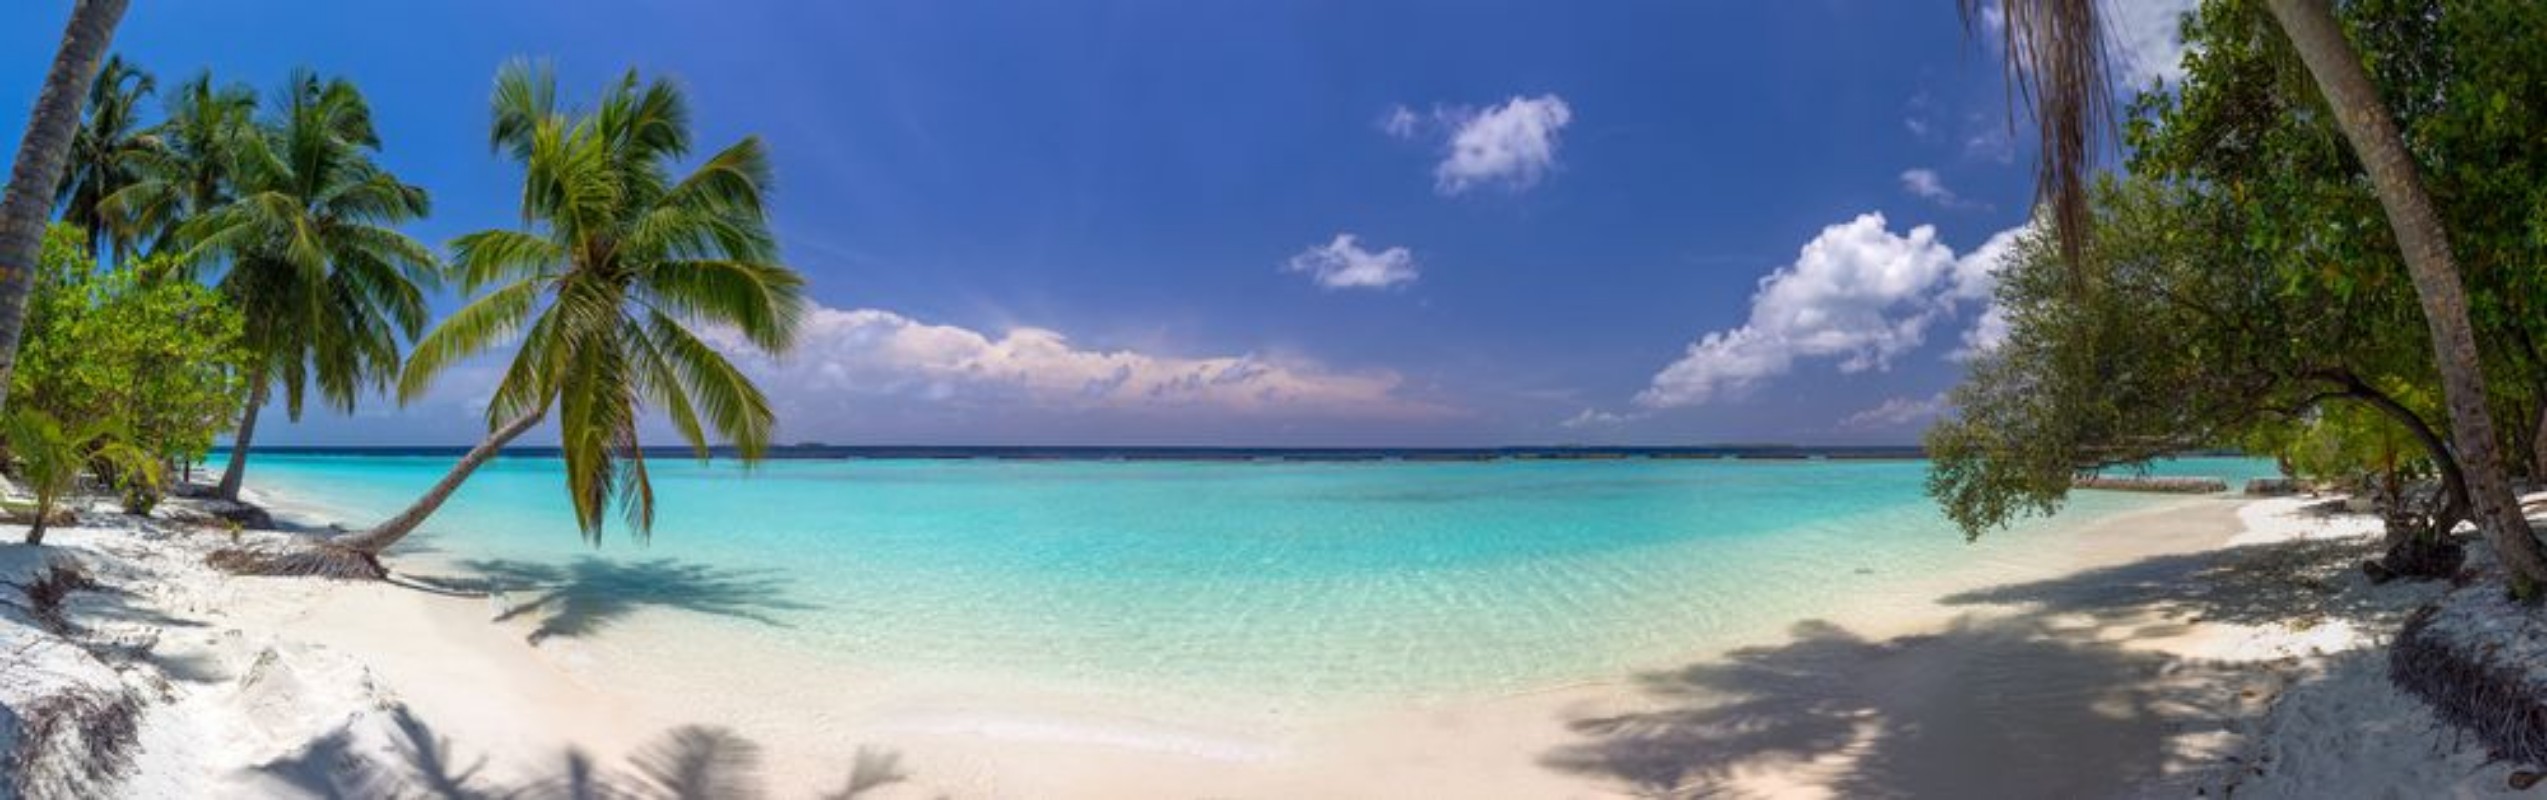 Picture of Beach panorama at Maldives with blue sky palm trees and turquoi